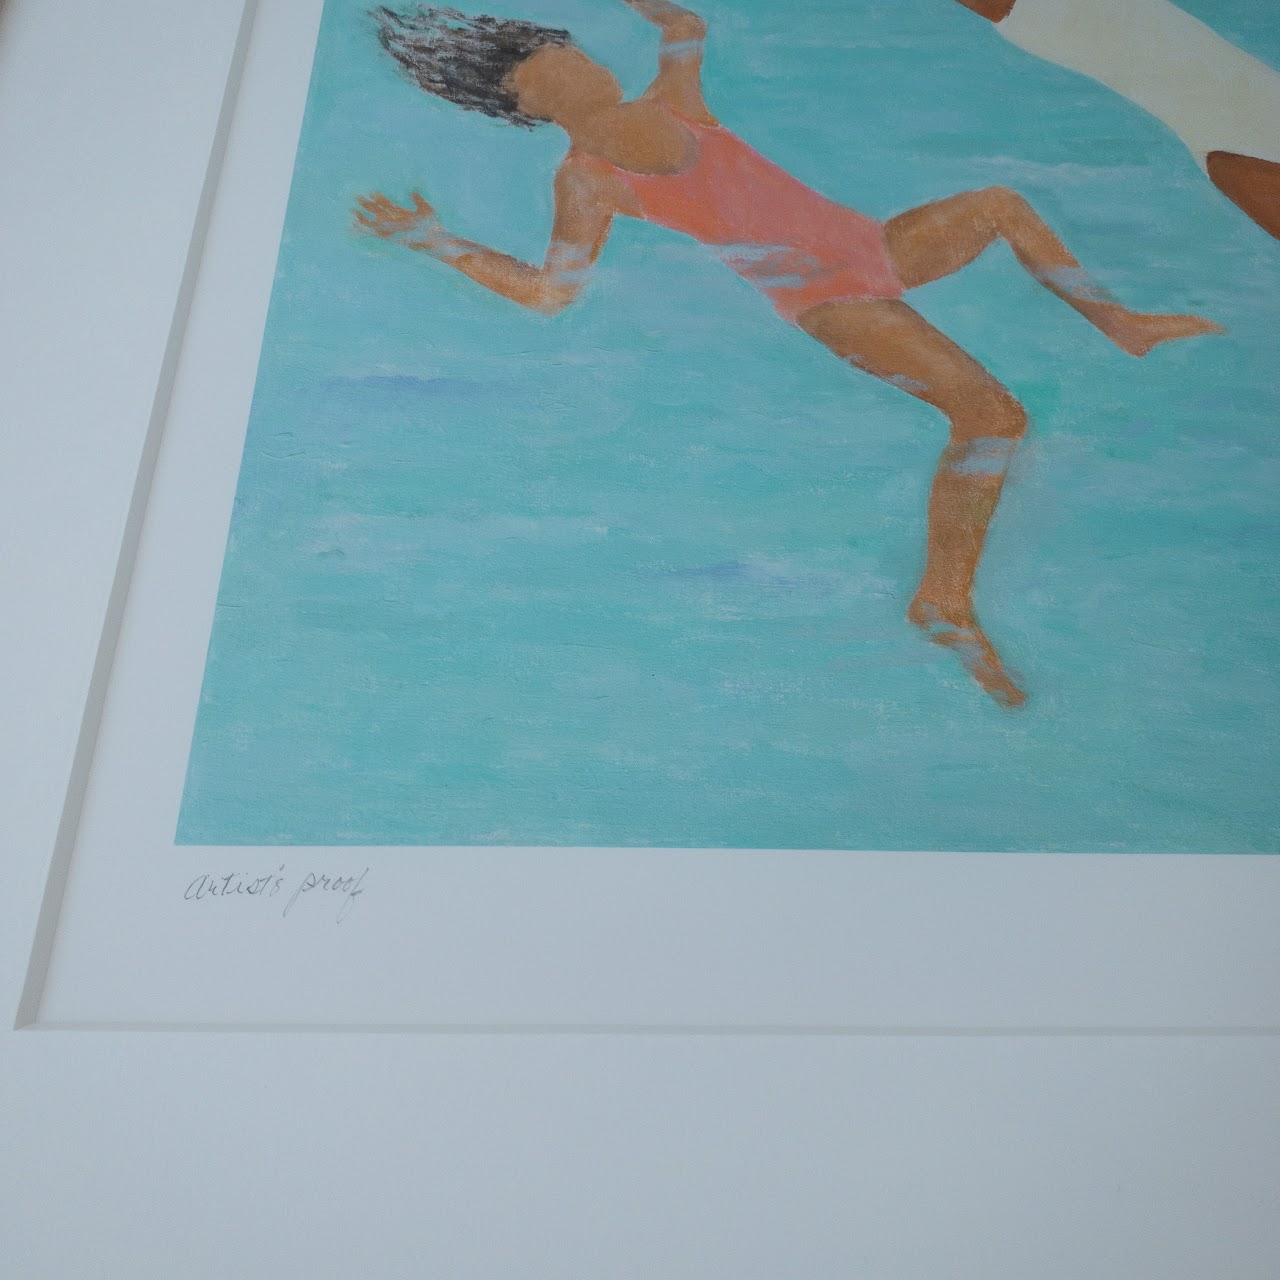 Marjorie Price Signed 'The First Bathers' Artist's Proof Print